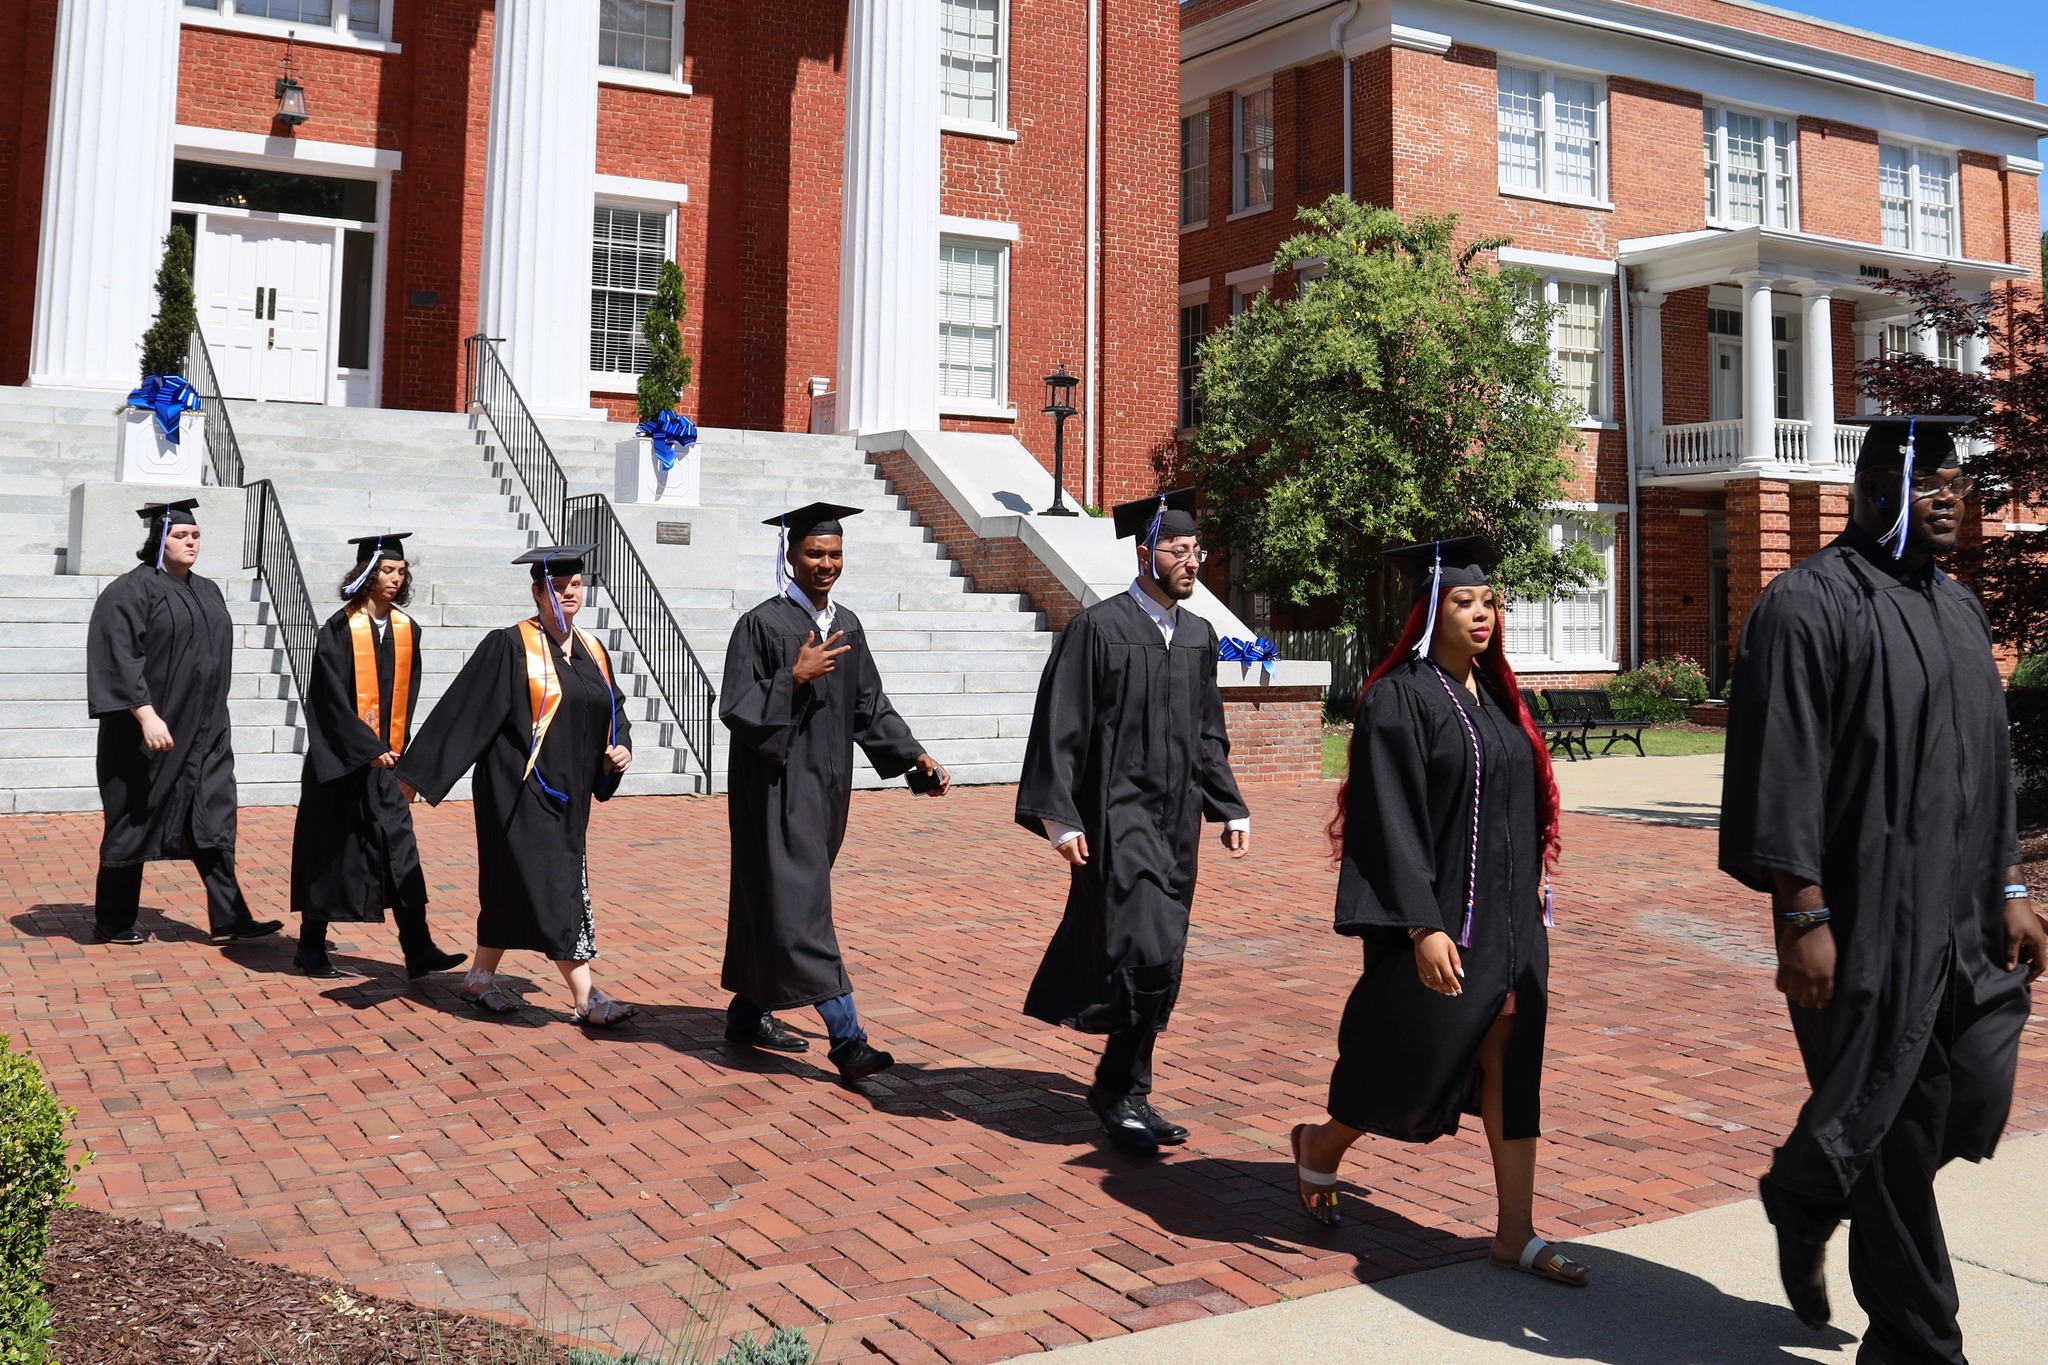 Louisburg College students walking from Main to Commencement Ceremony.